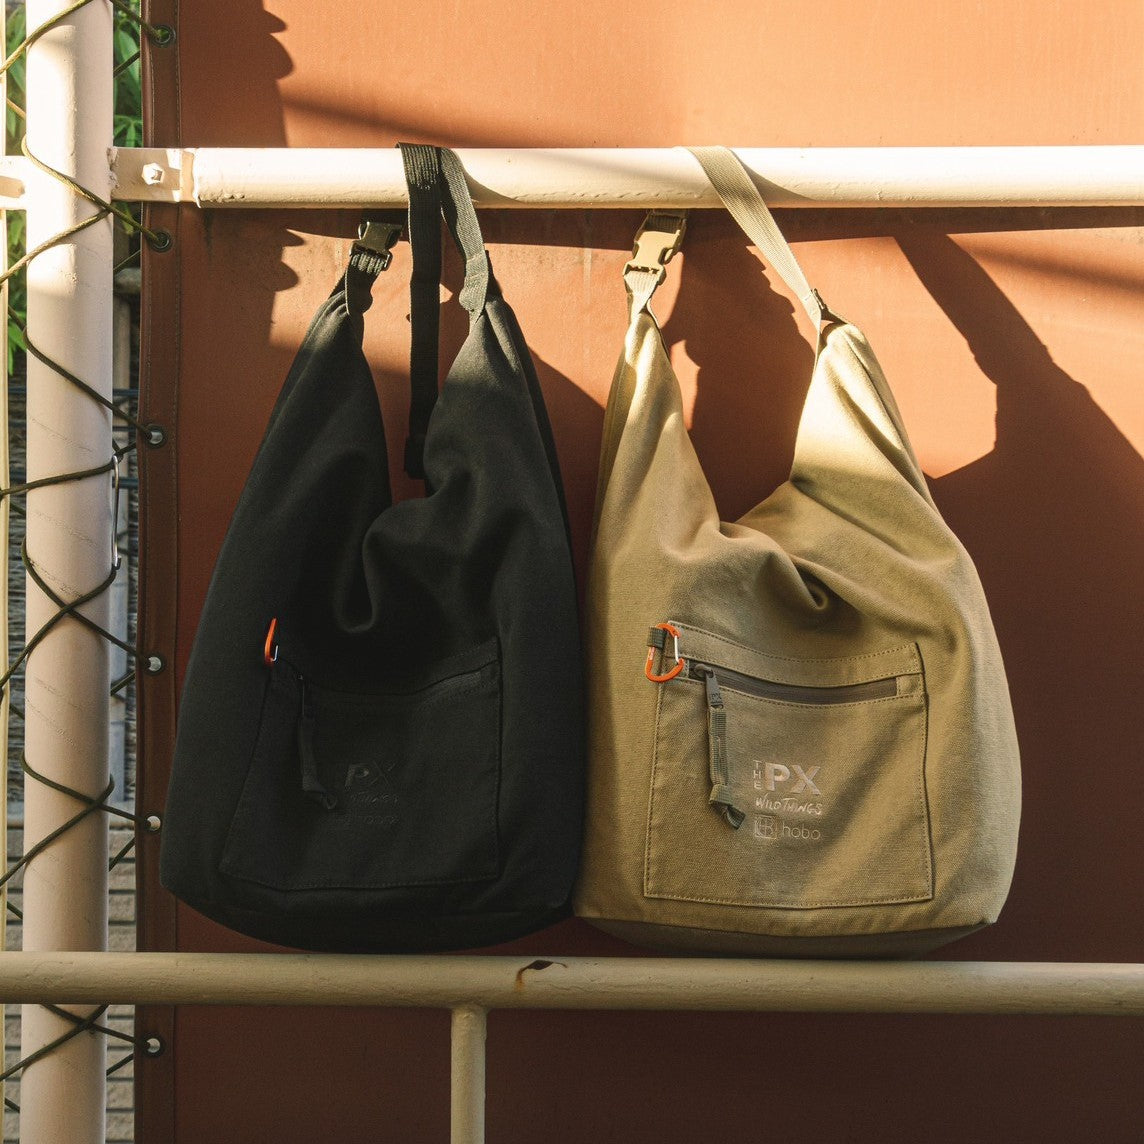 hobo(ホーボー) PLAY SOFT COOLER ROLLTOP BAG COTTON CANVAS VINTAGE